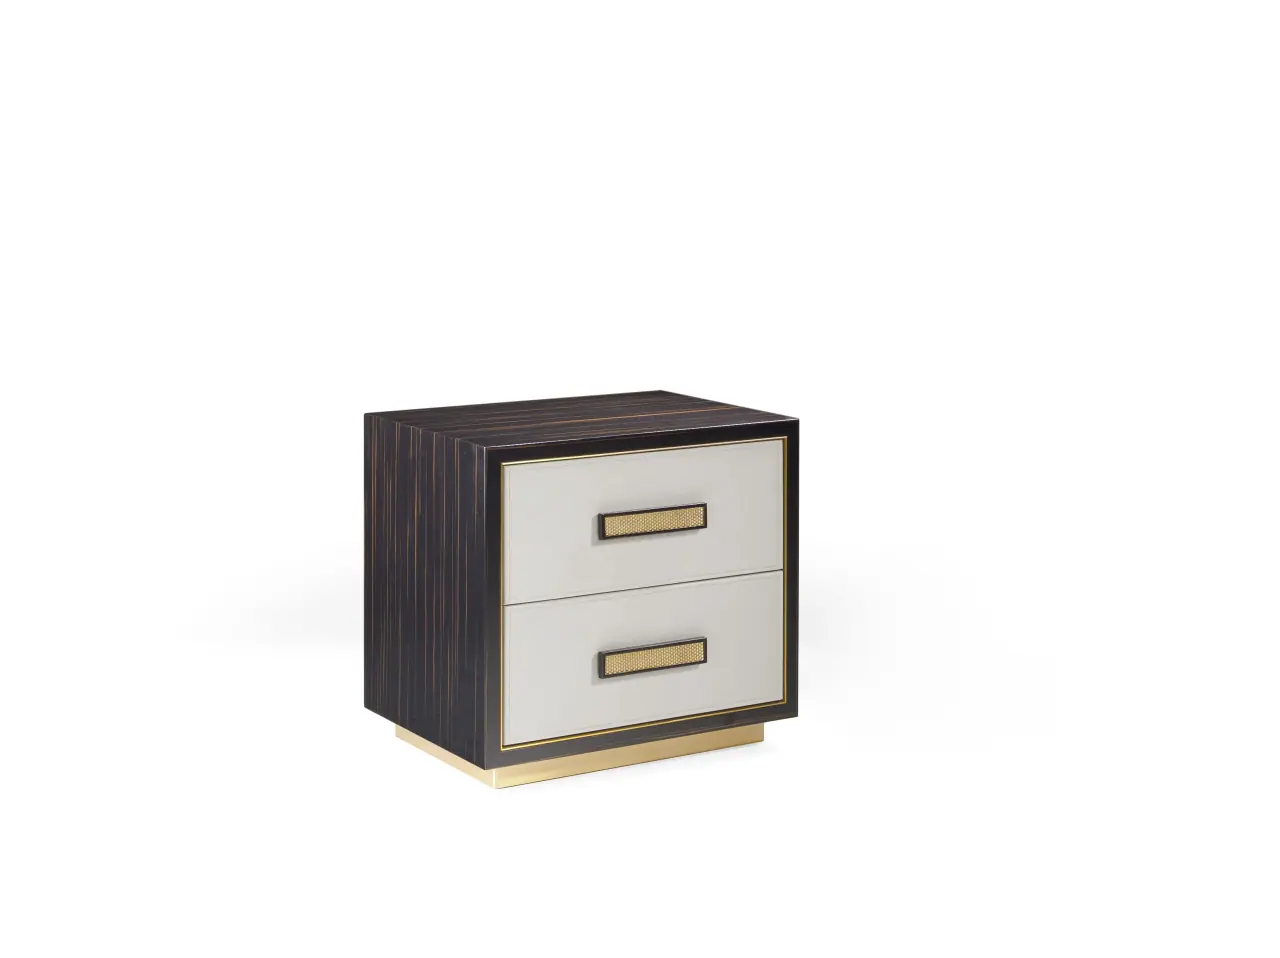 soher-marquis-collection-bedside-table11